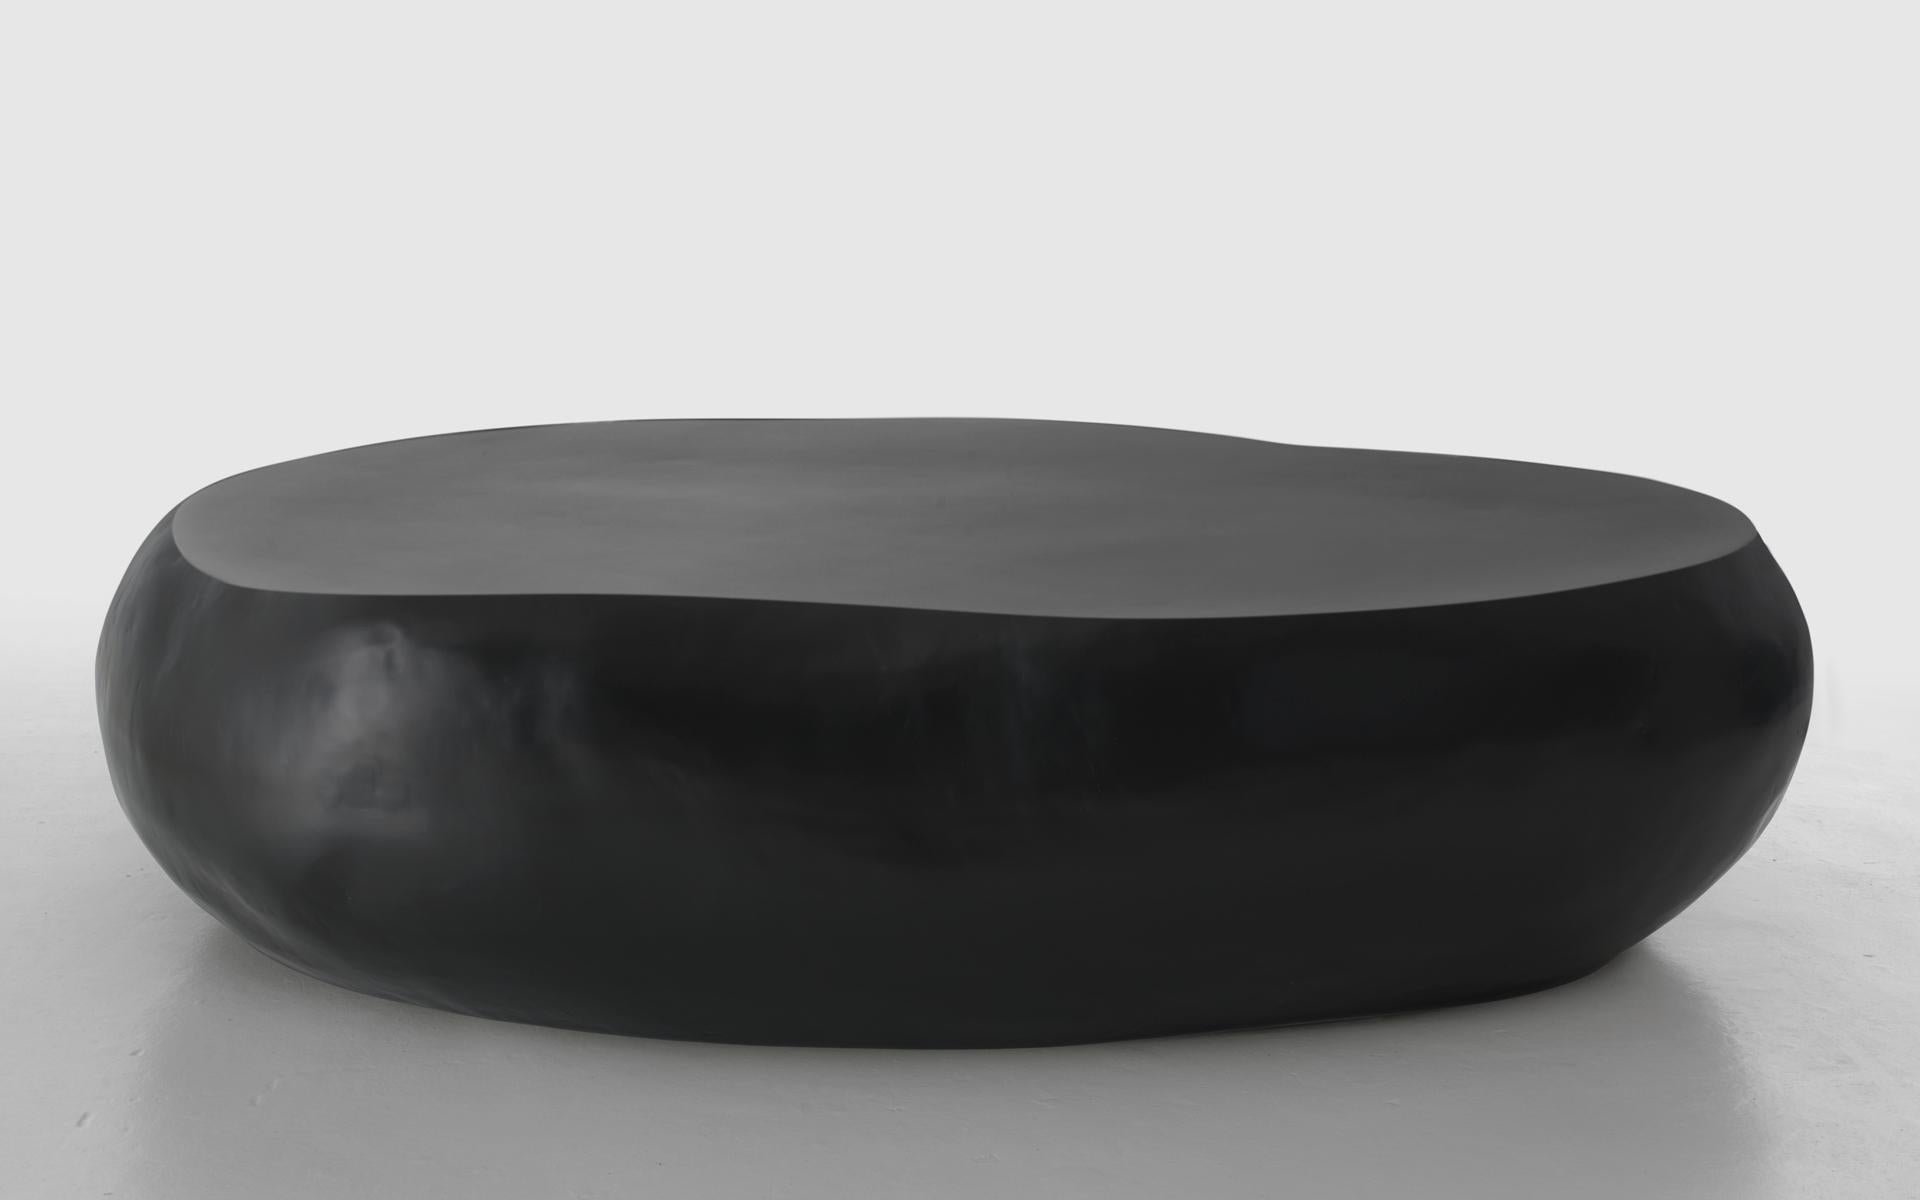 Fiberglass Slab Coffee Table by Imperfettolab